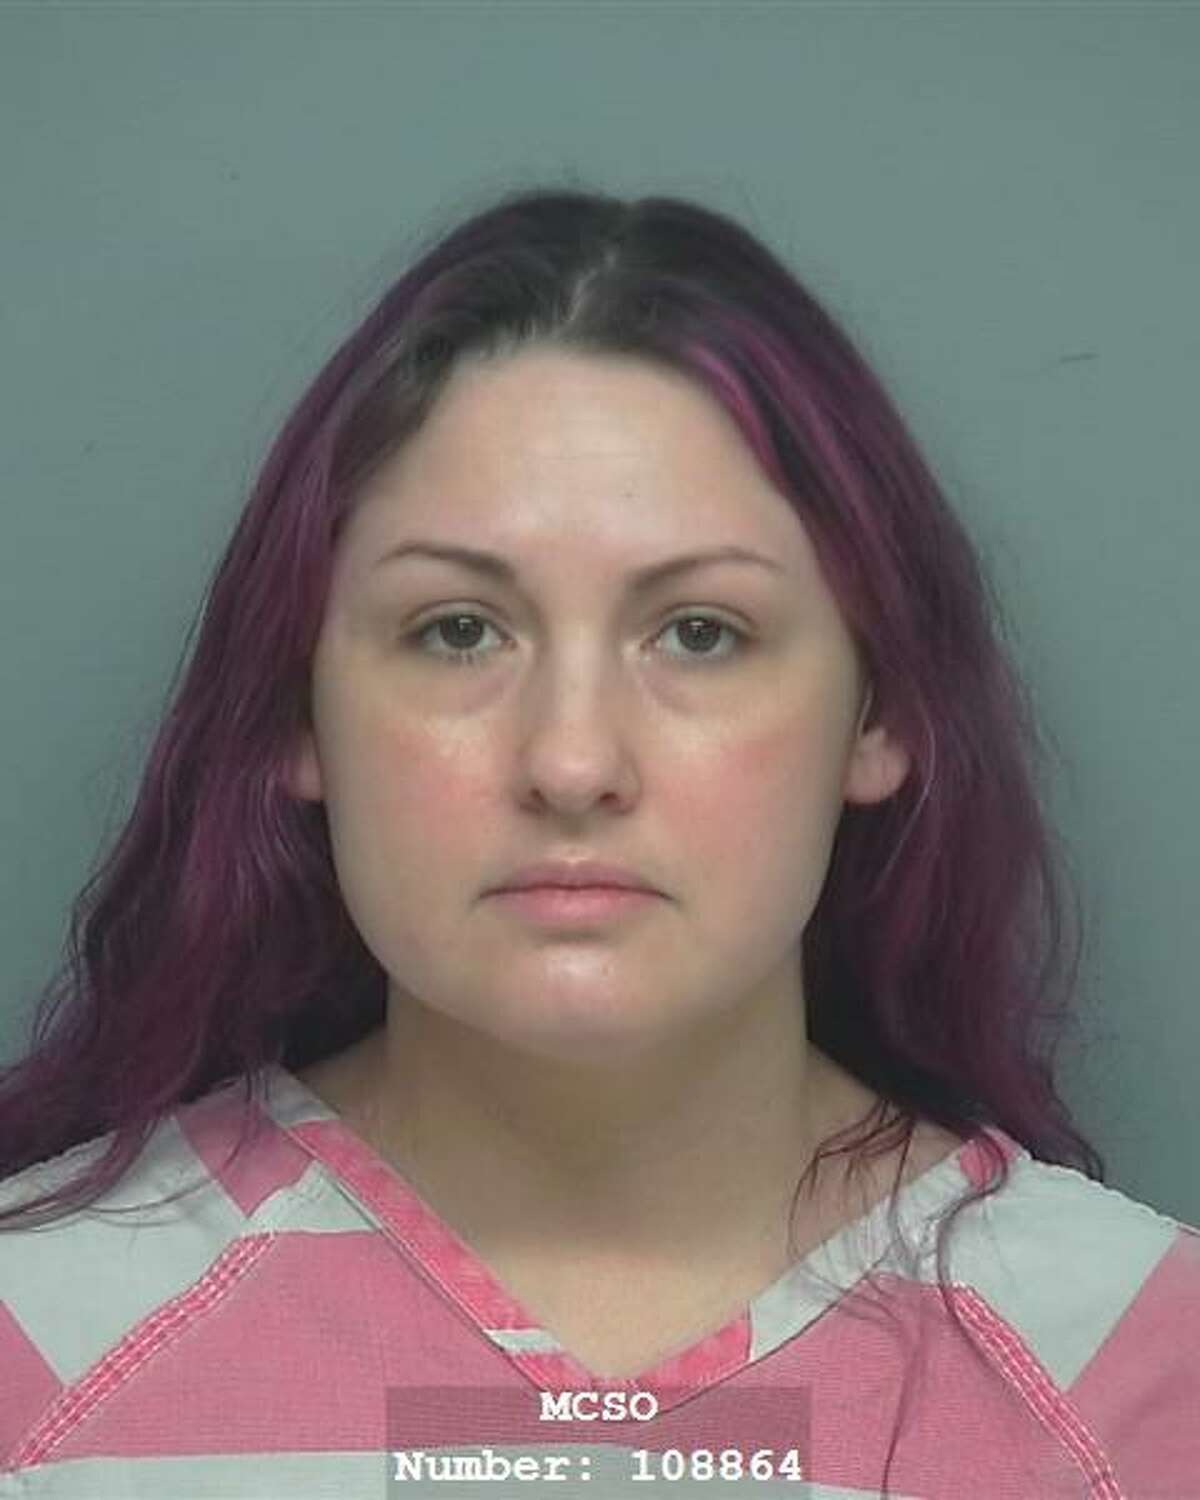 Barbara Guess Mazock, 36, of Conroe, is being charged with indecency with a child by sexual contact, a second-degree felony.